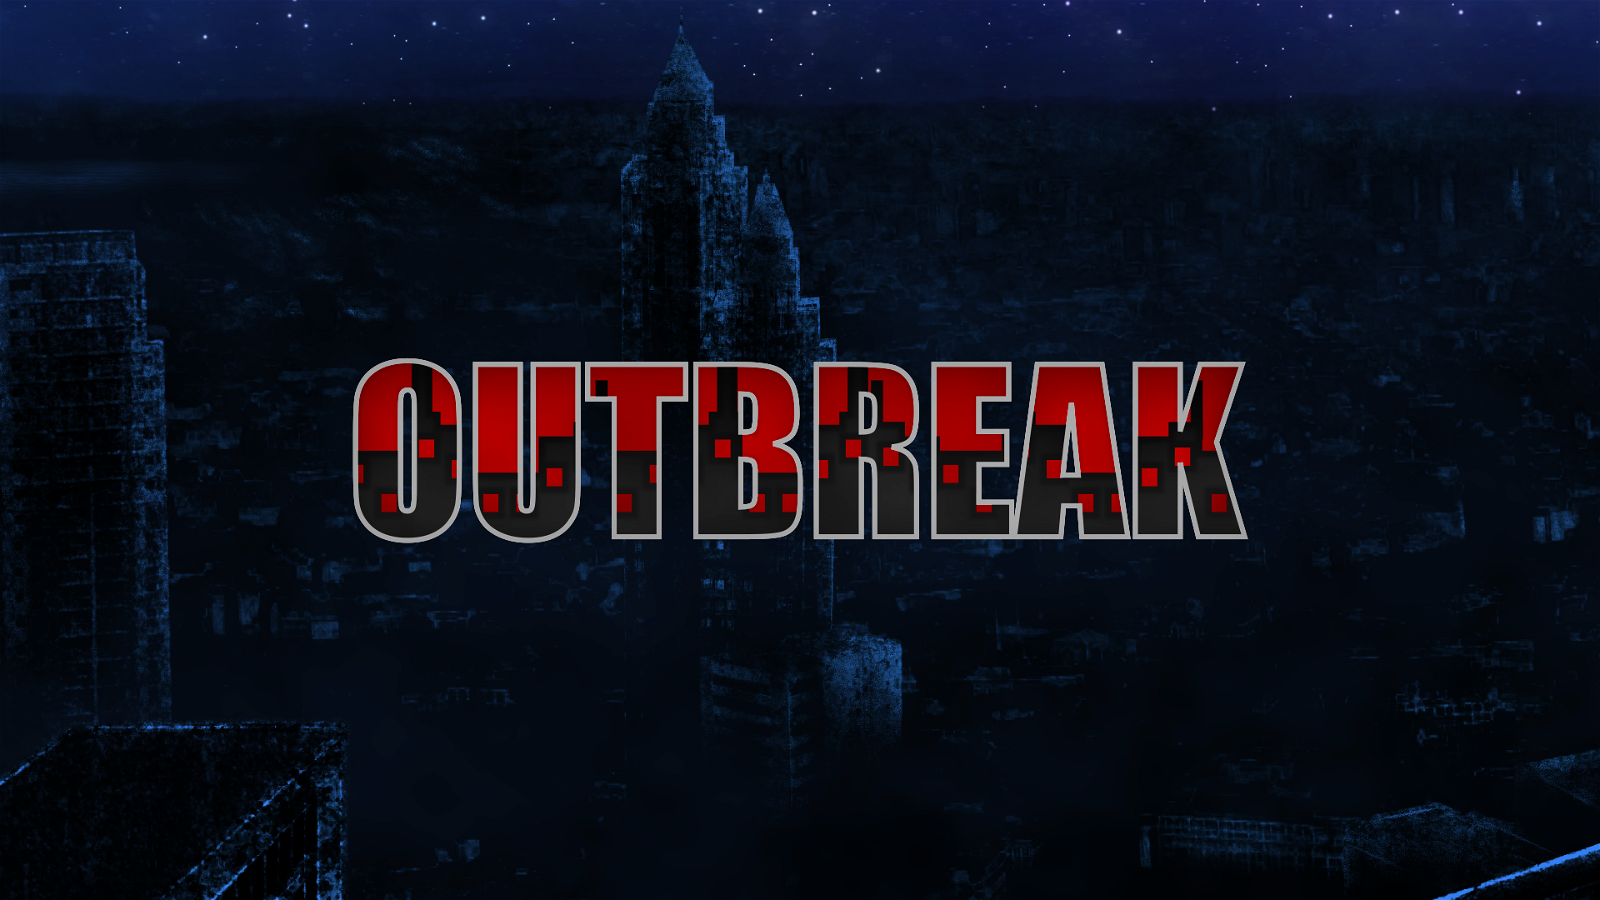 Image of Outbreak